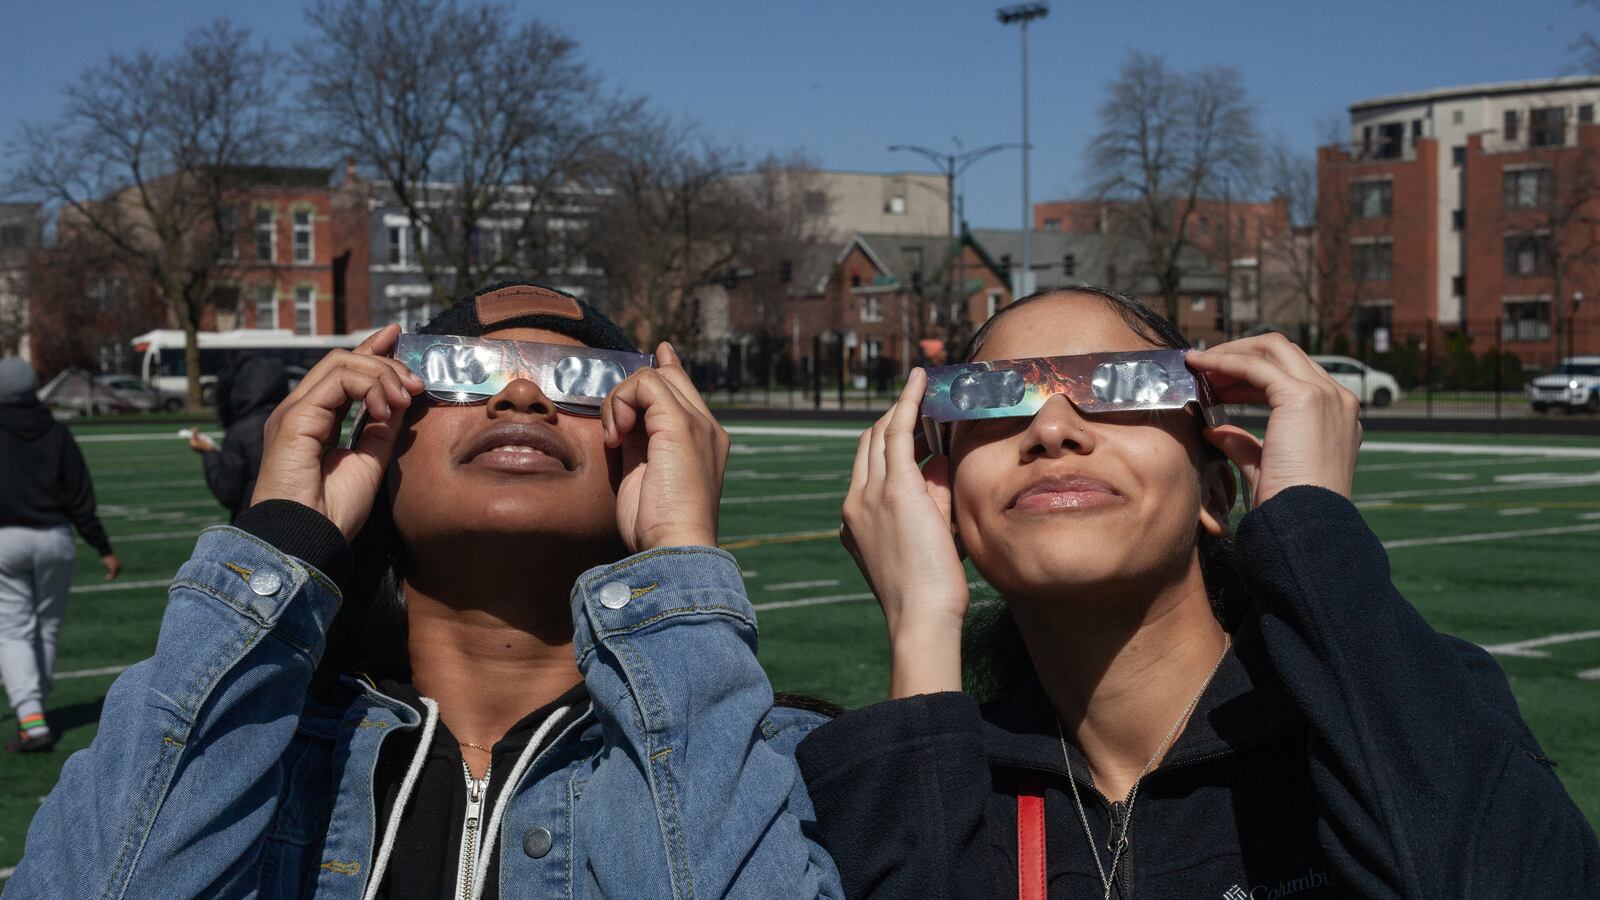 Two students holidng eclipse viewing glasses look up at the sky with a row of buidlings in the background.